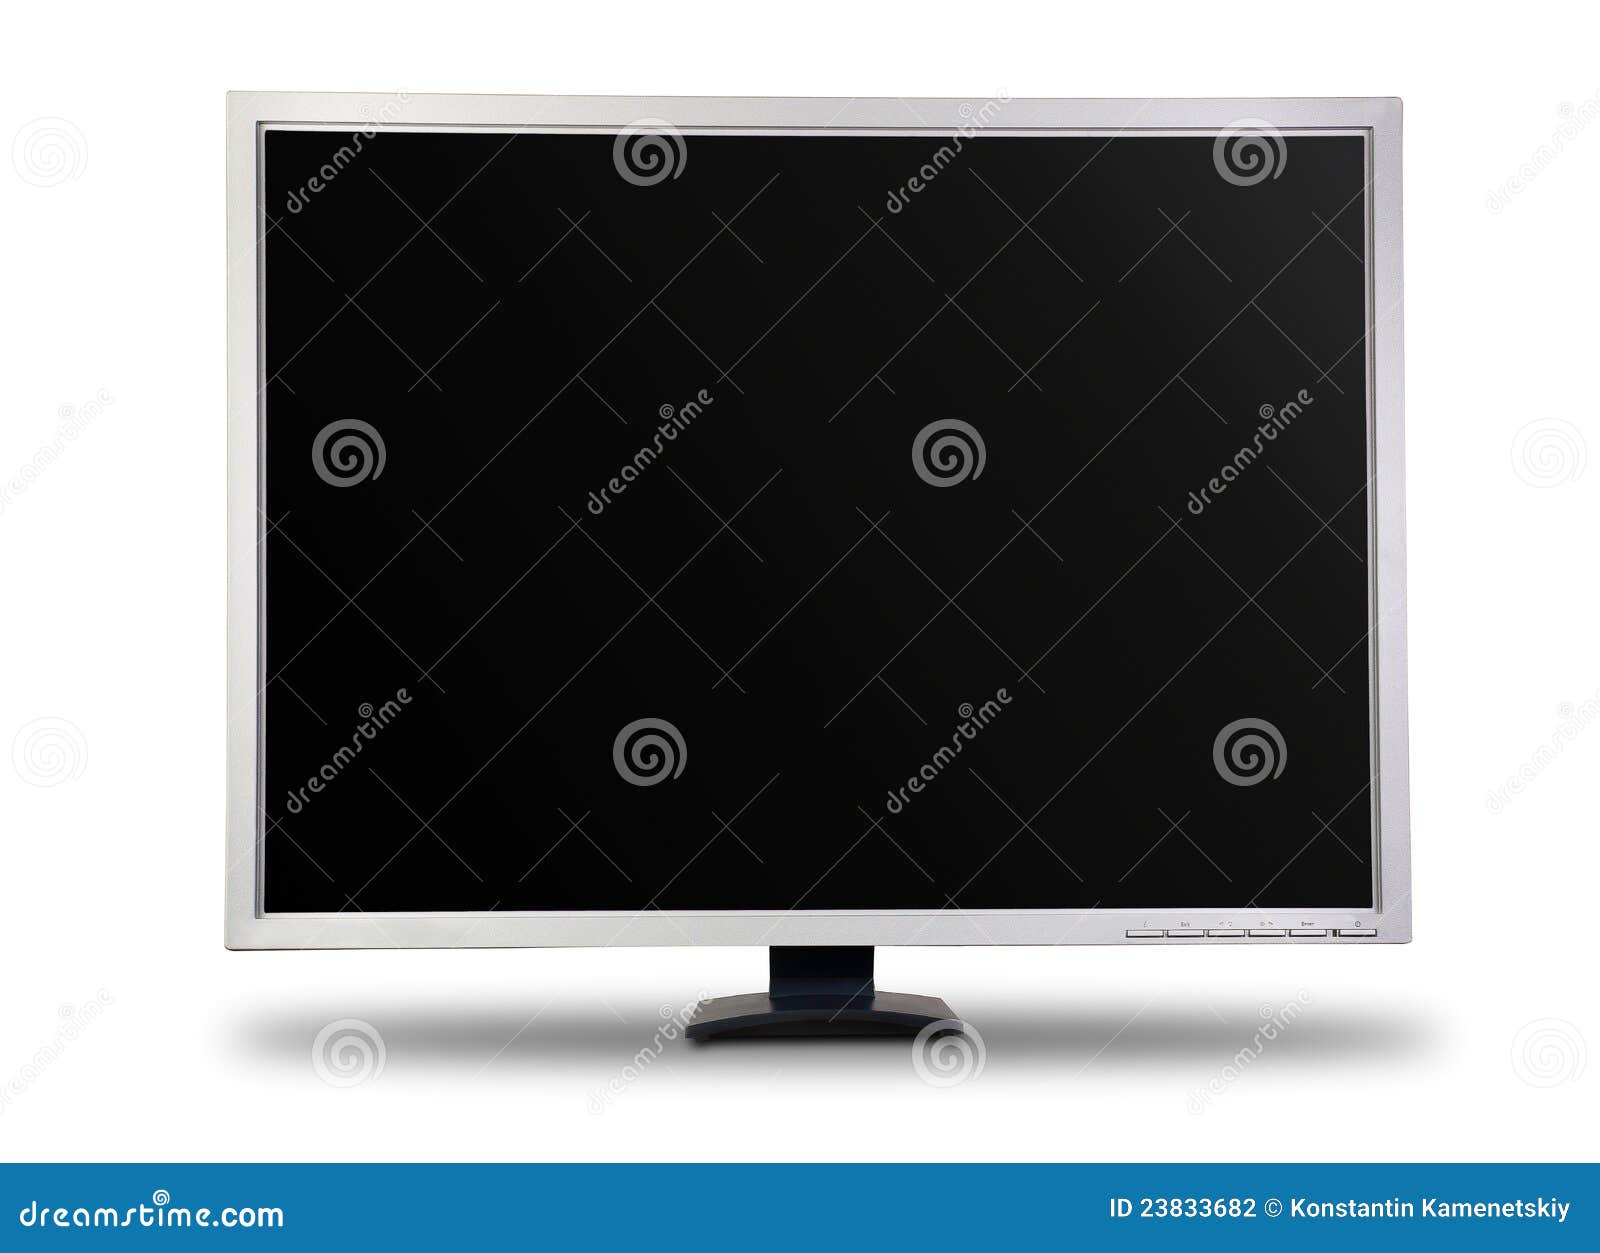 Computer Display Isolated on White. Stock Photo - Image of equipment ...